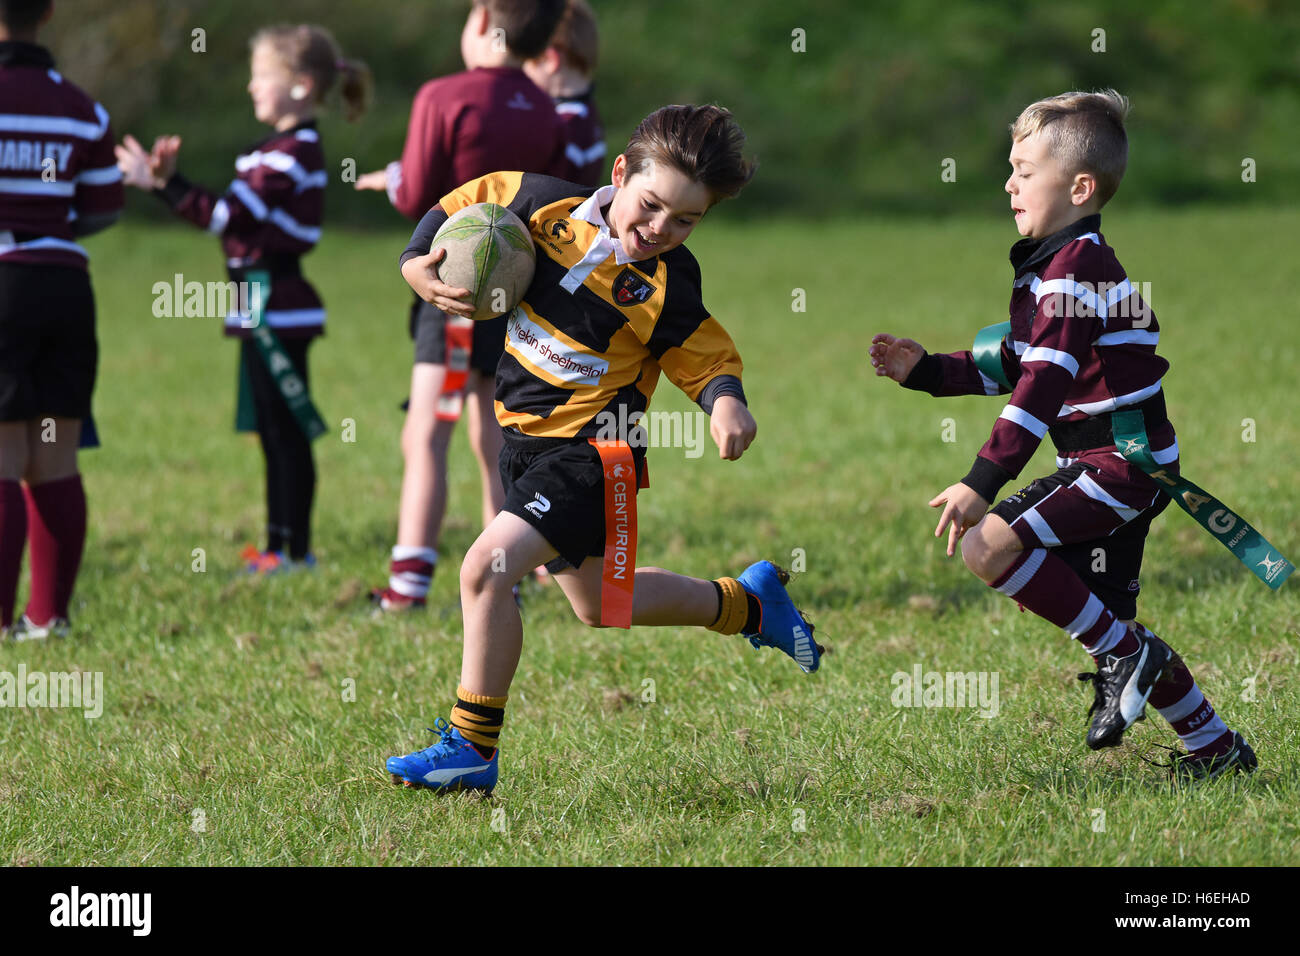 Happy smiling boy playing Junior childrens tag rugby match action Britain Uk children childrens sport  healthy activity sport boys sports Stock Photo